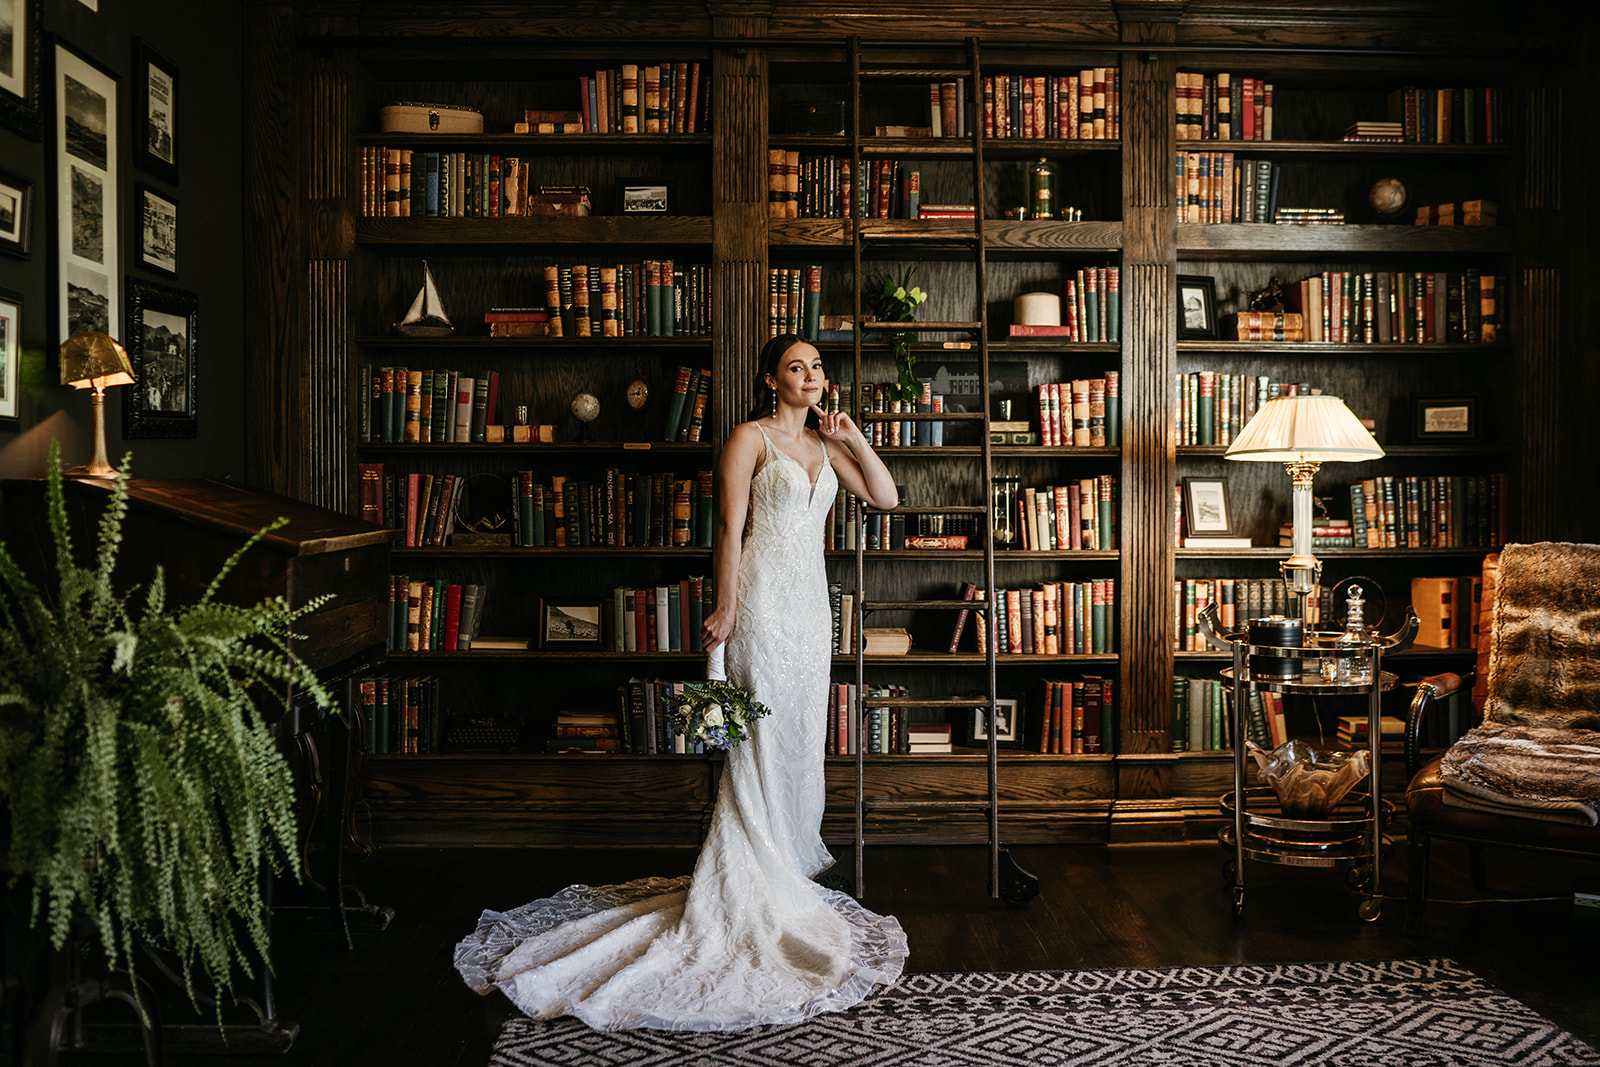 Bridal portrait session at the luxurious, old world The Manor House in Littleton, Colorado.